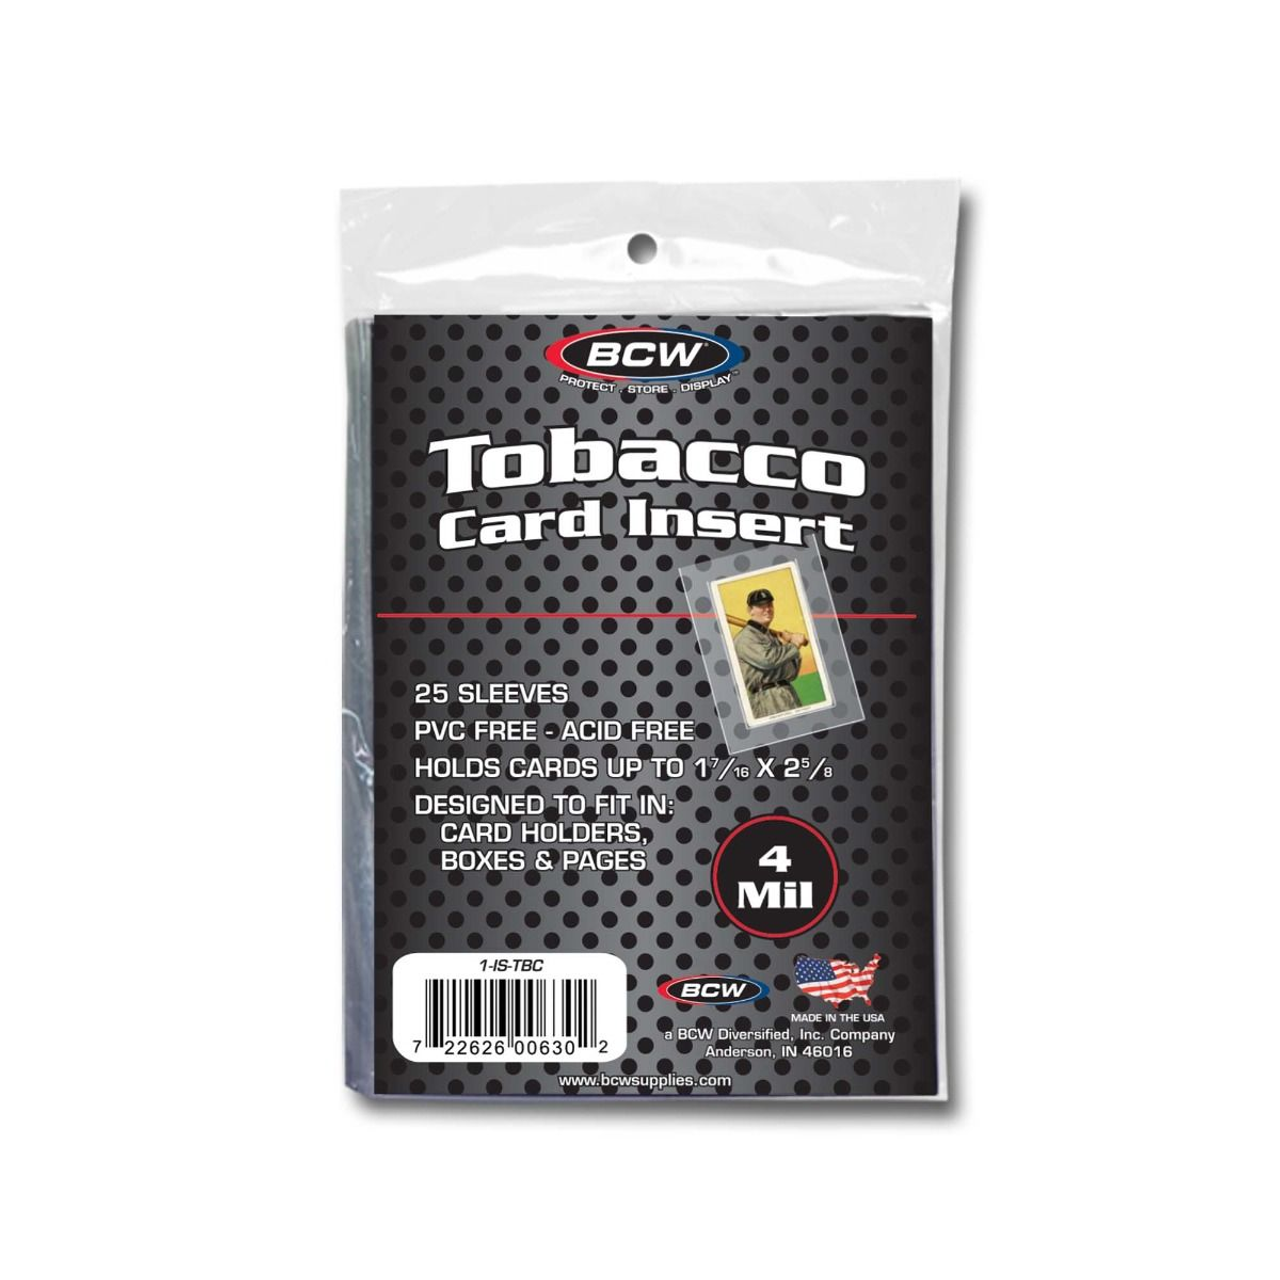 Tobacco Card Insert Sleeve 25ct Pack